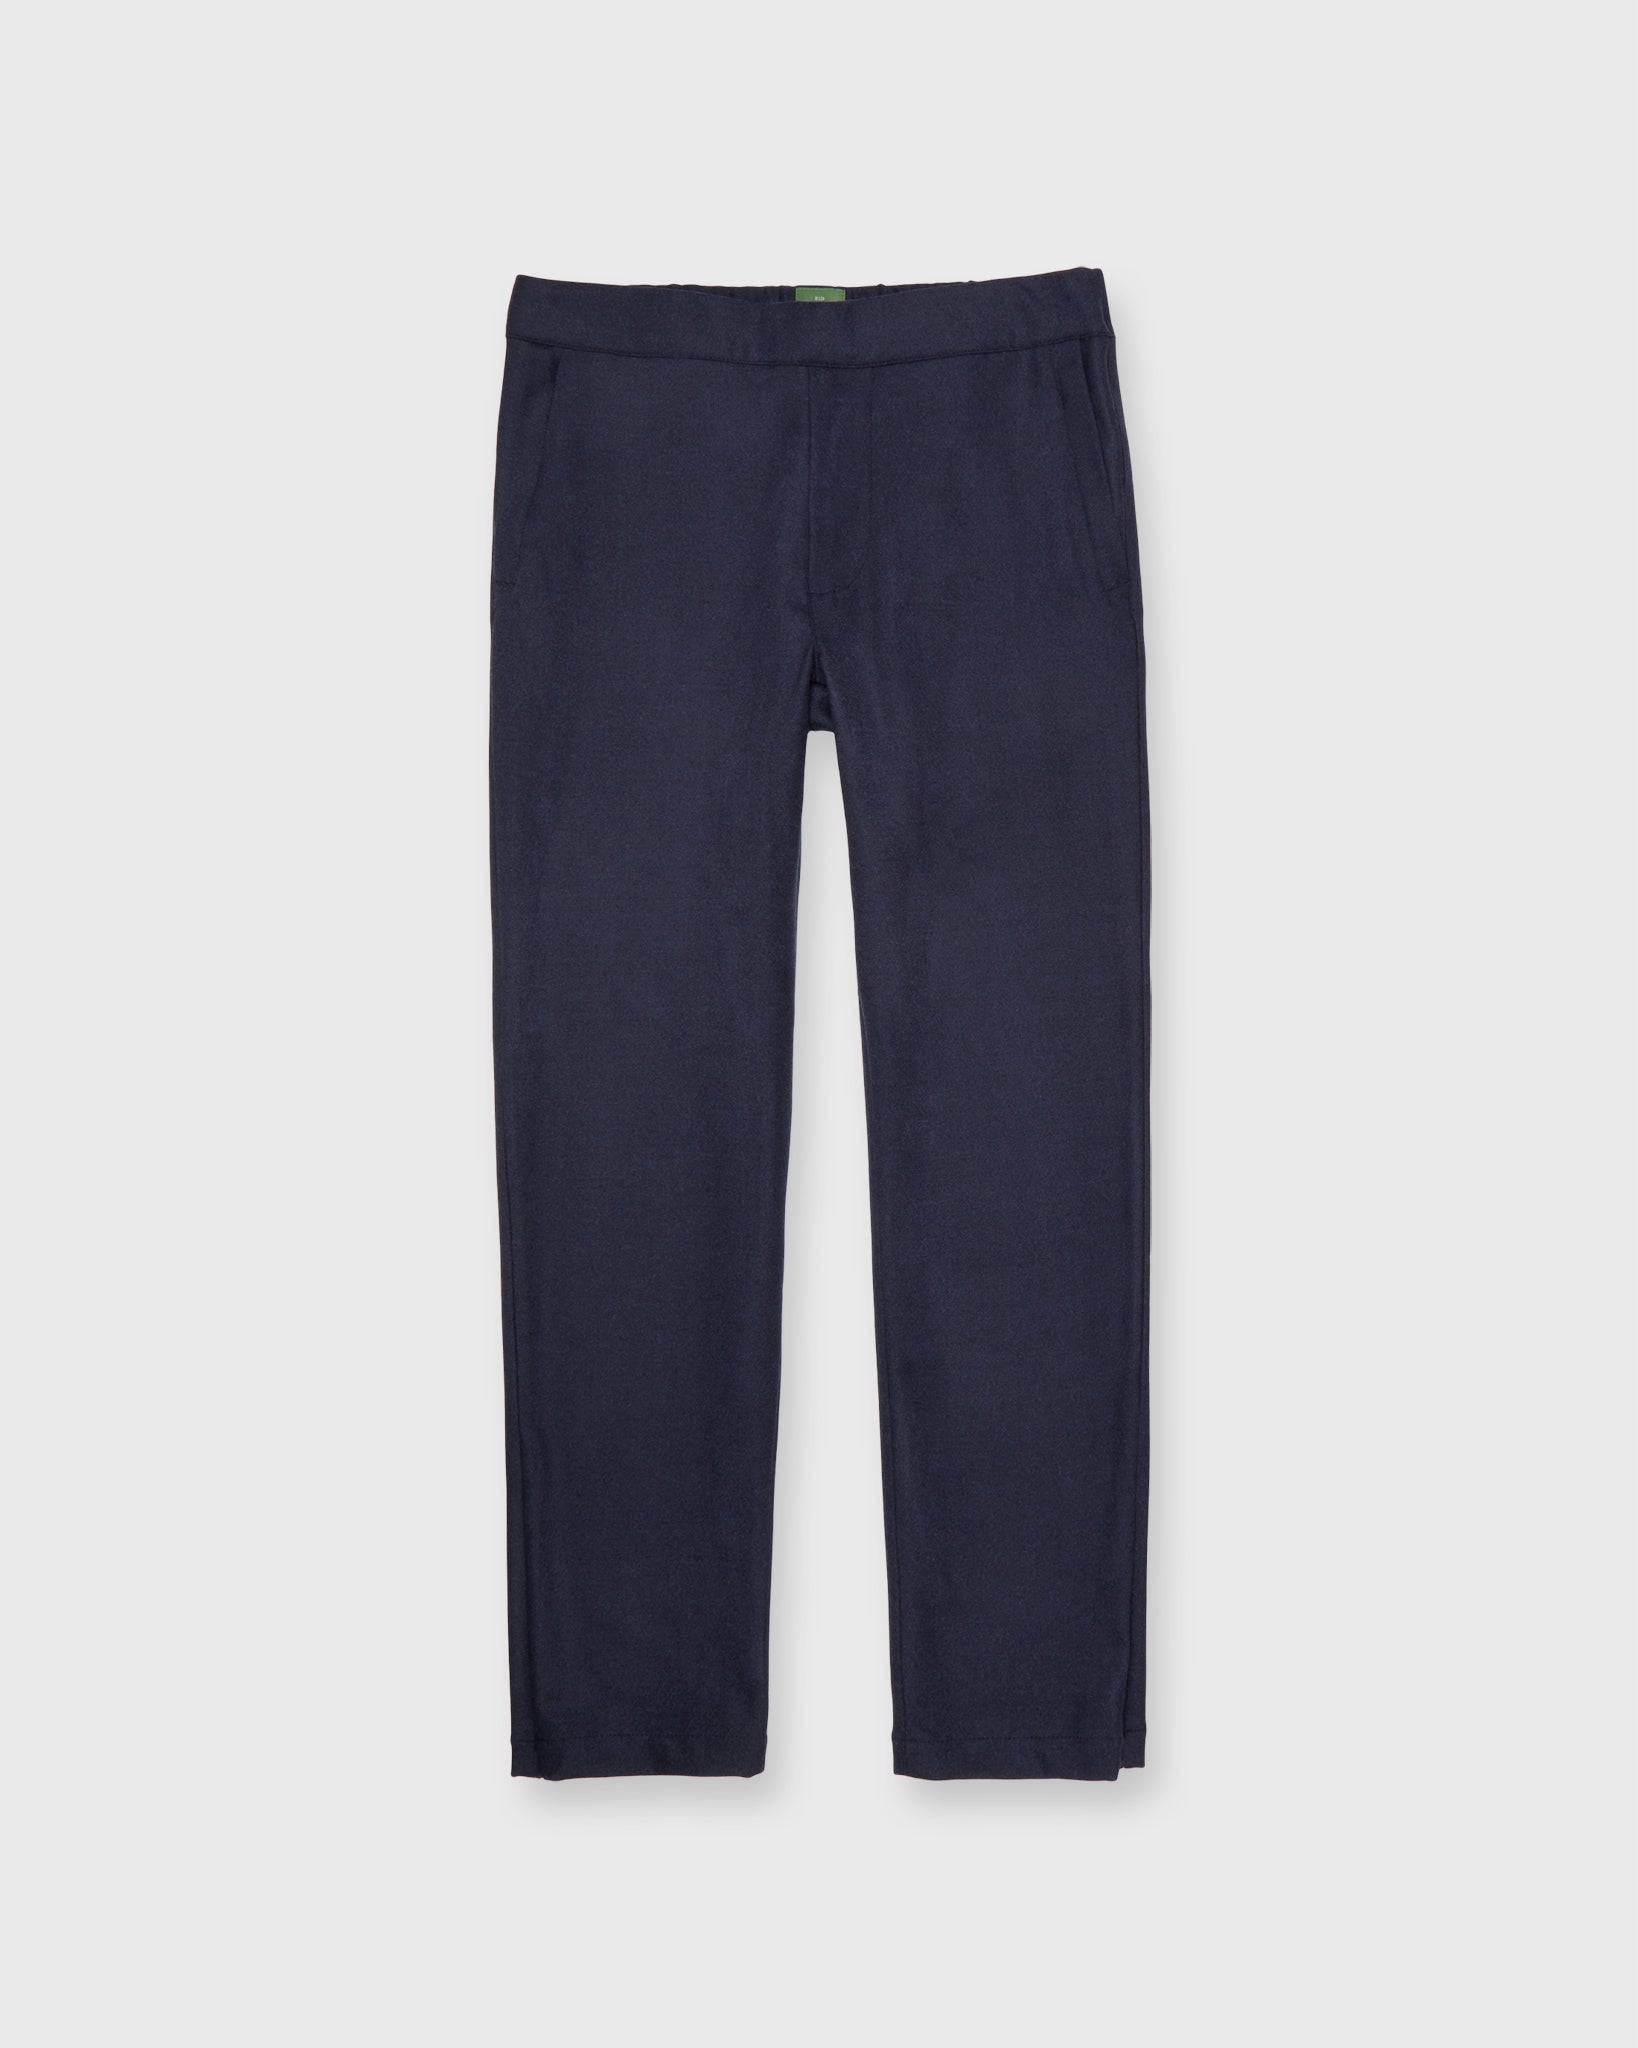 Tailored Track Pant in Air Force Blue Wool Stretch Flannel